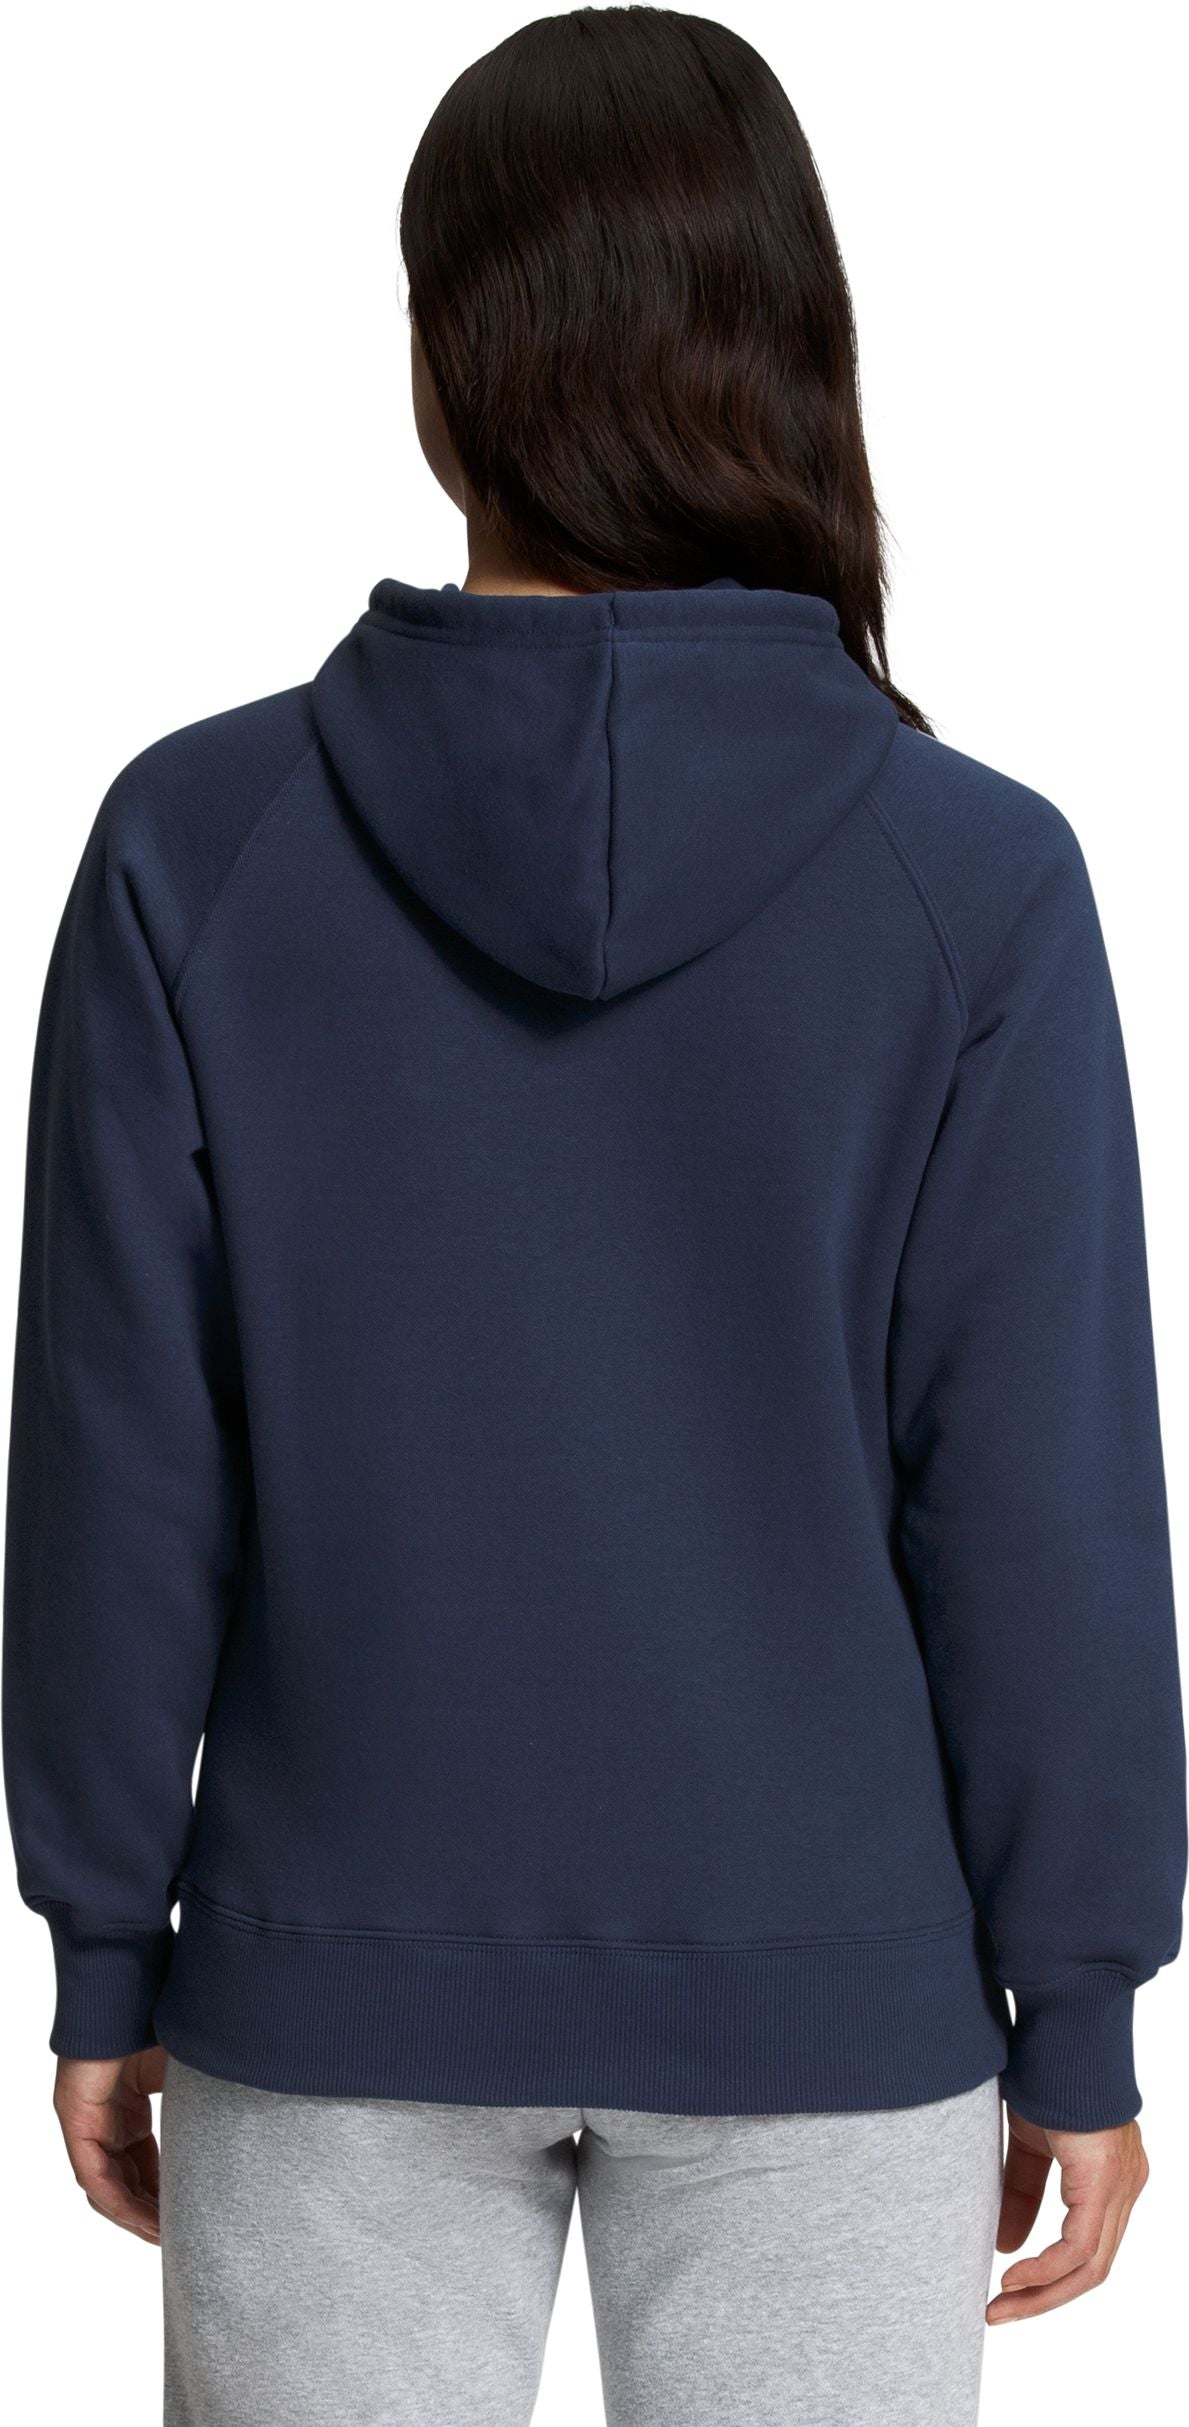 The North Face Apparel W Half Dome Hoodie Summit Navy